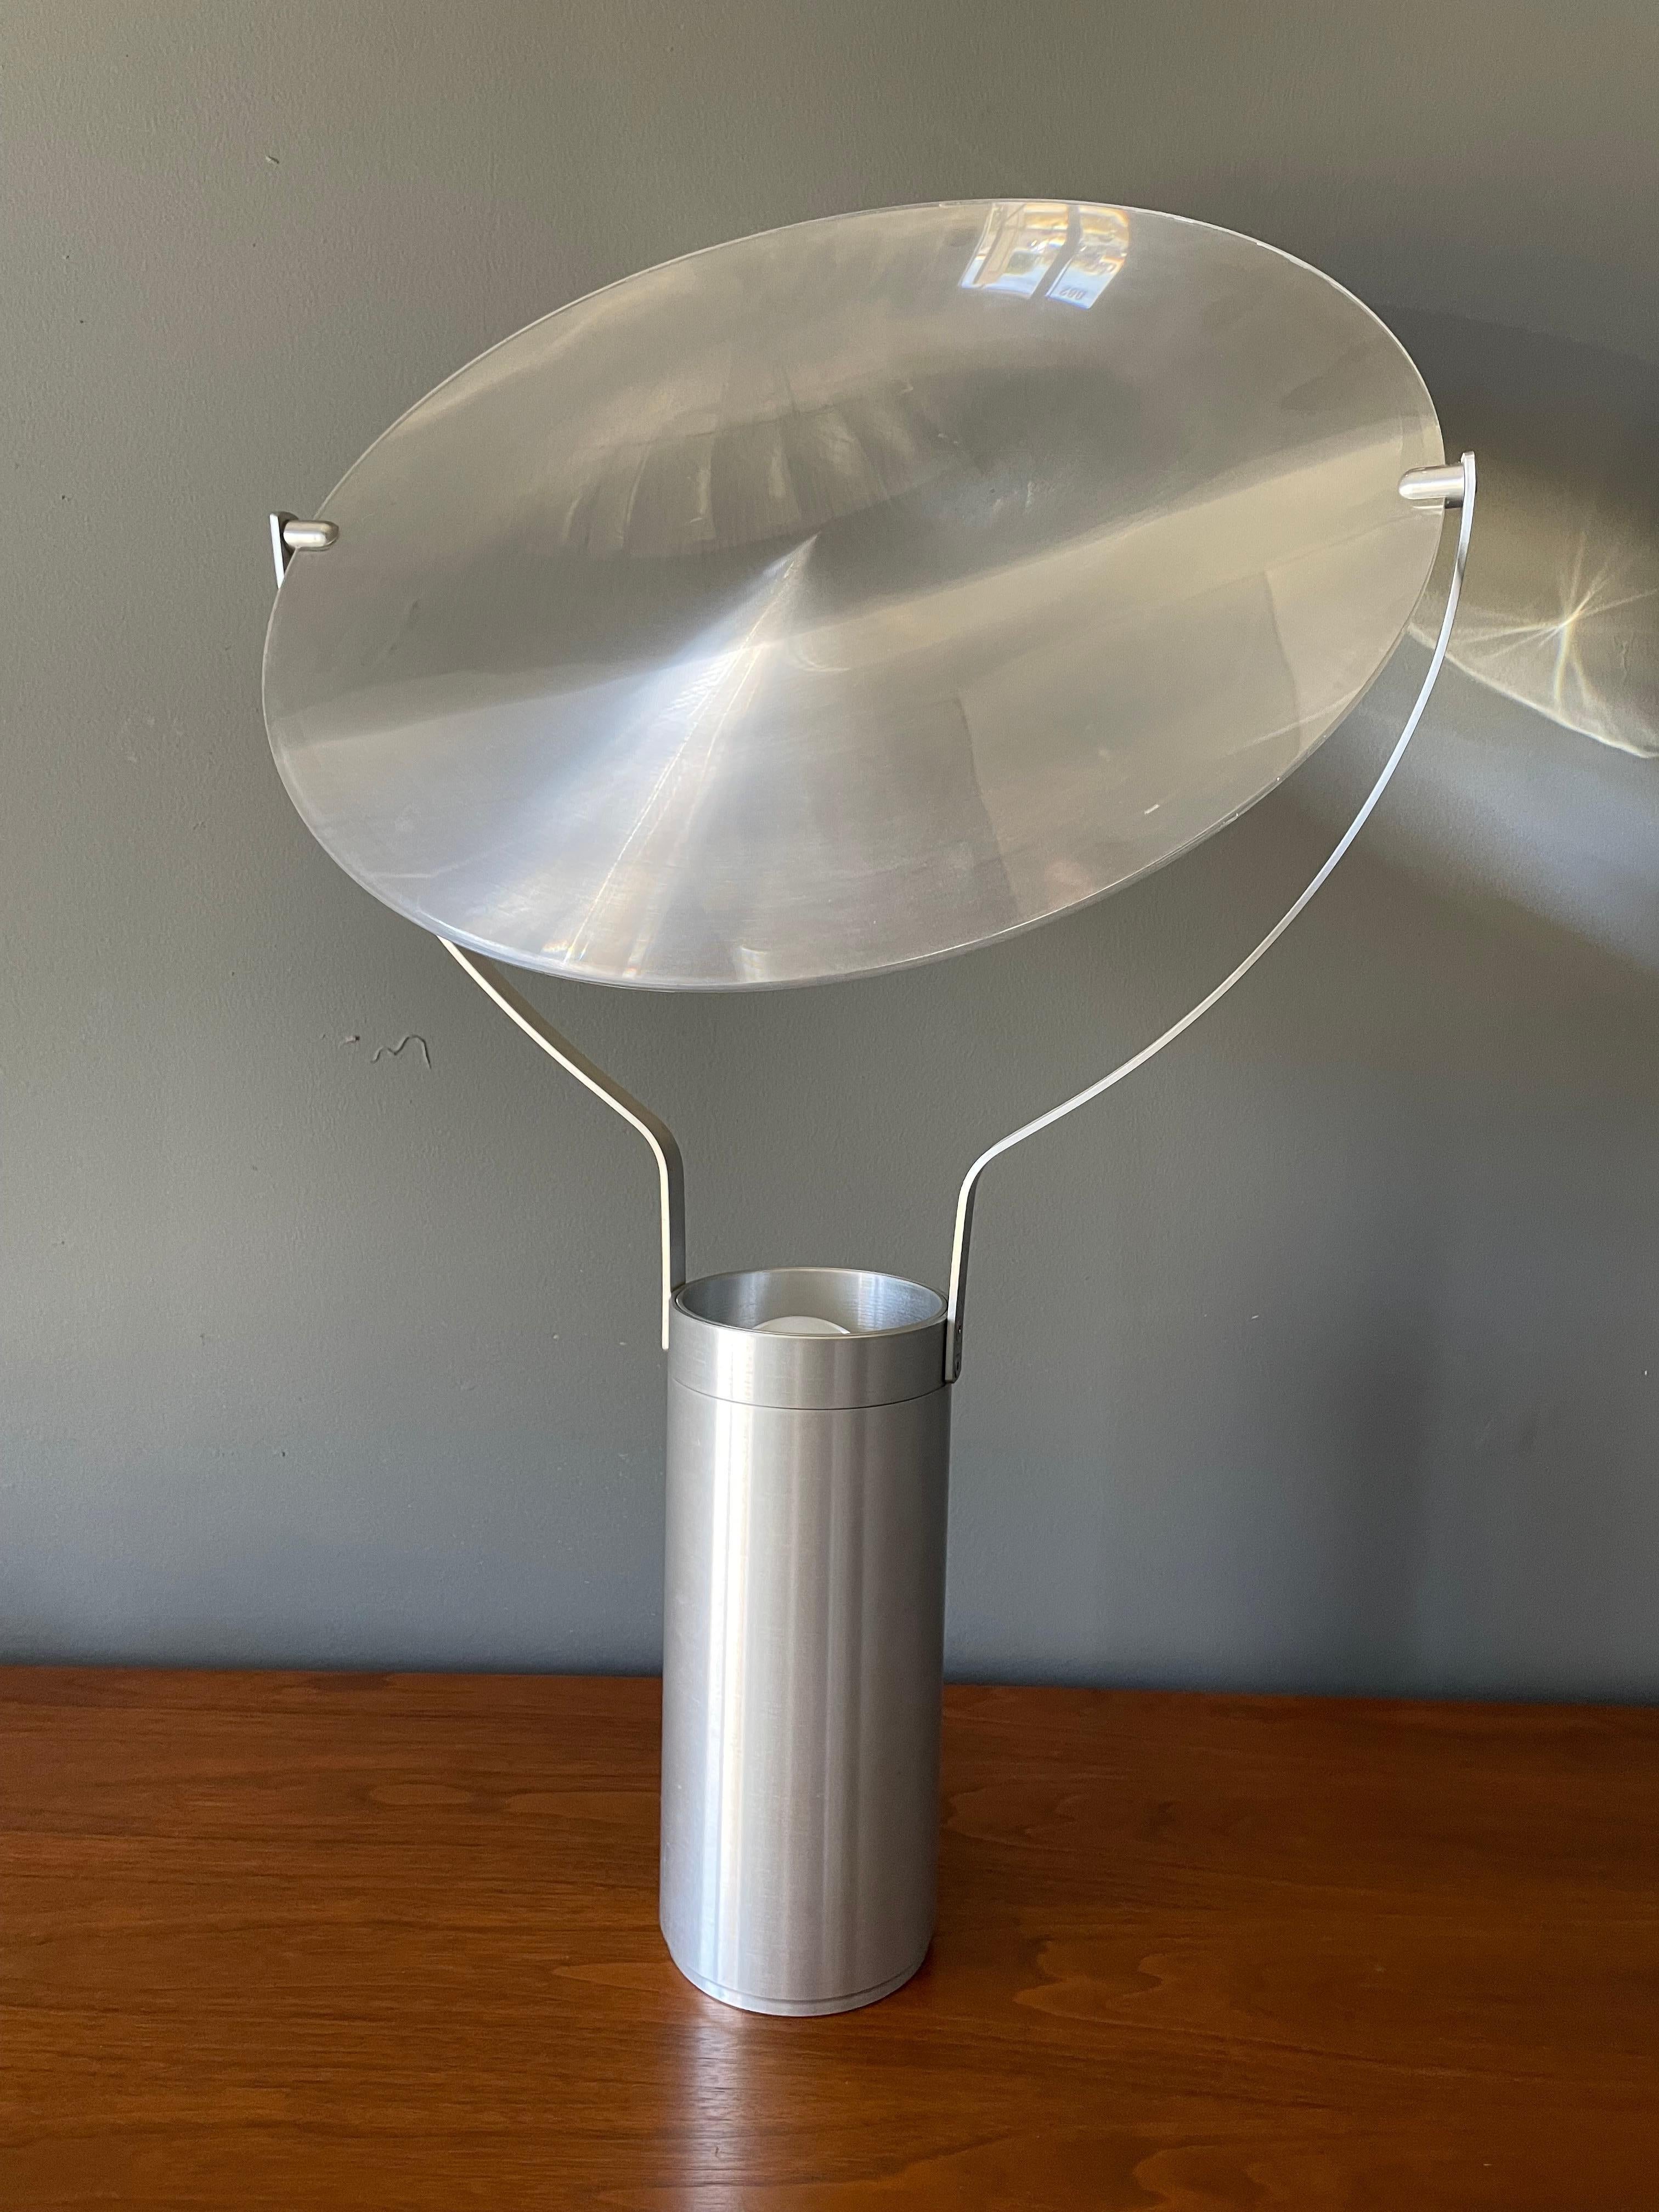 Postmodern spun aluminum and acrylic lamp. Diffuser is positionable in a multitude of different ways. It is equipped with a dimmer switch as well.